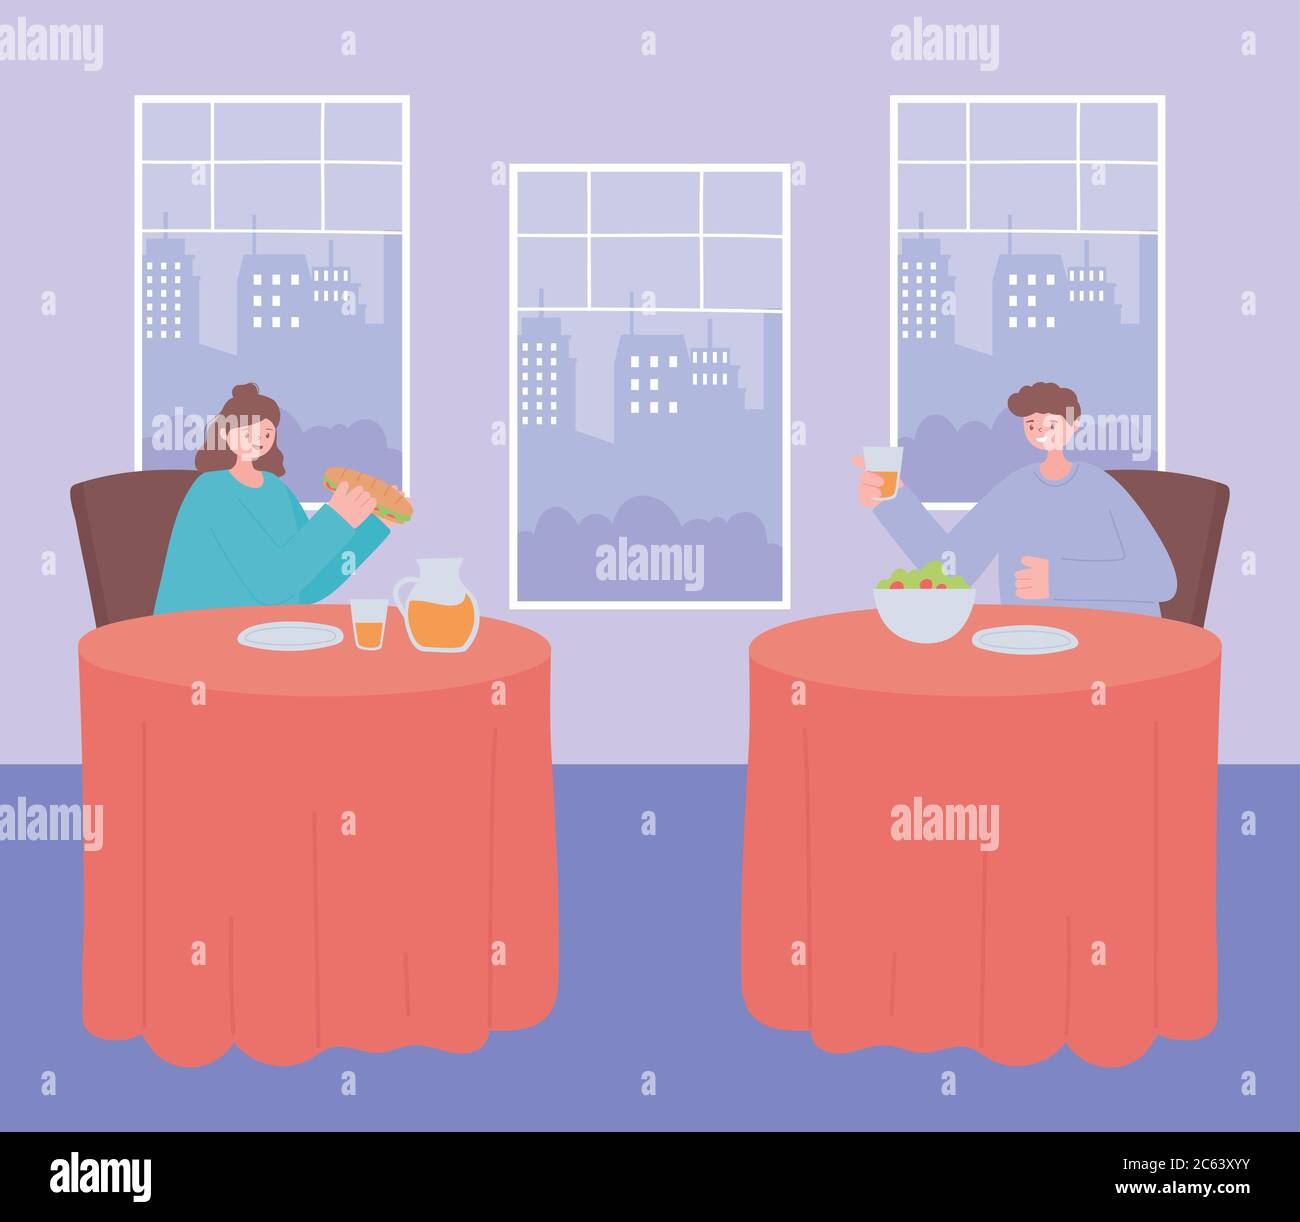 restaurant social distancing, people eating food alone at tables, covid 19 pandemic, prevention of coronavirus infection vector illustration Stock Vector